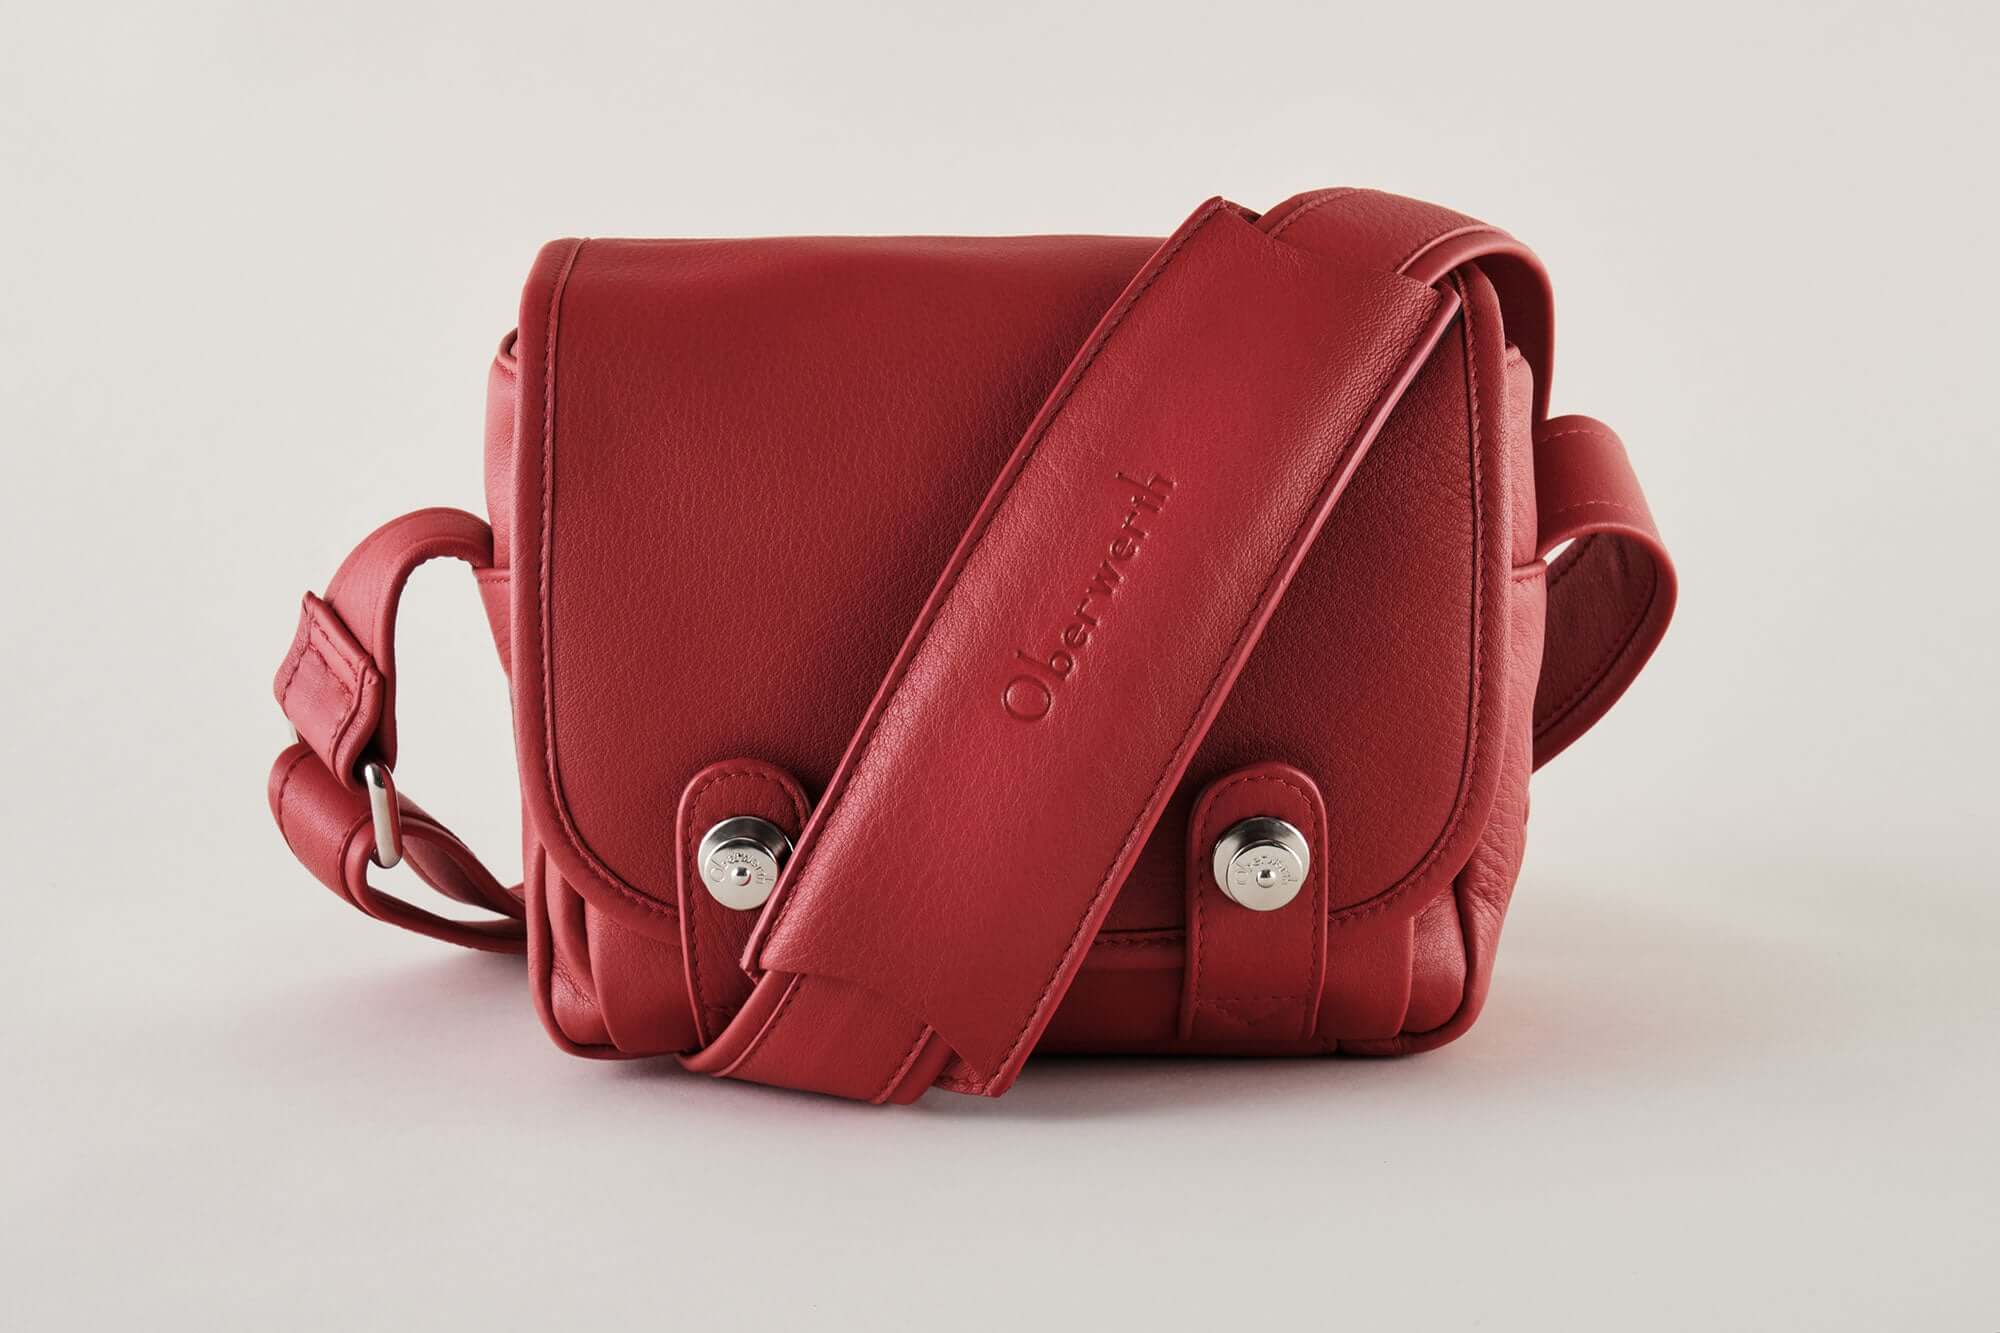 The Q Bag Casual (Phil) - Leica Q3 bag red !展示会グッズ！